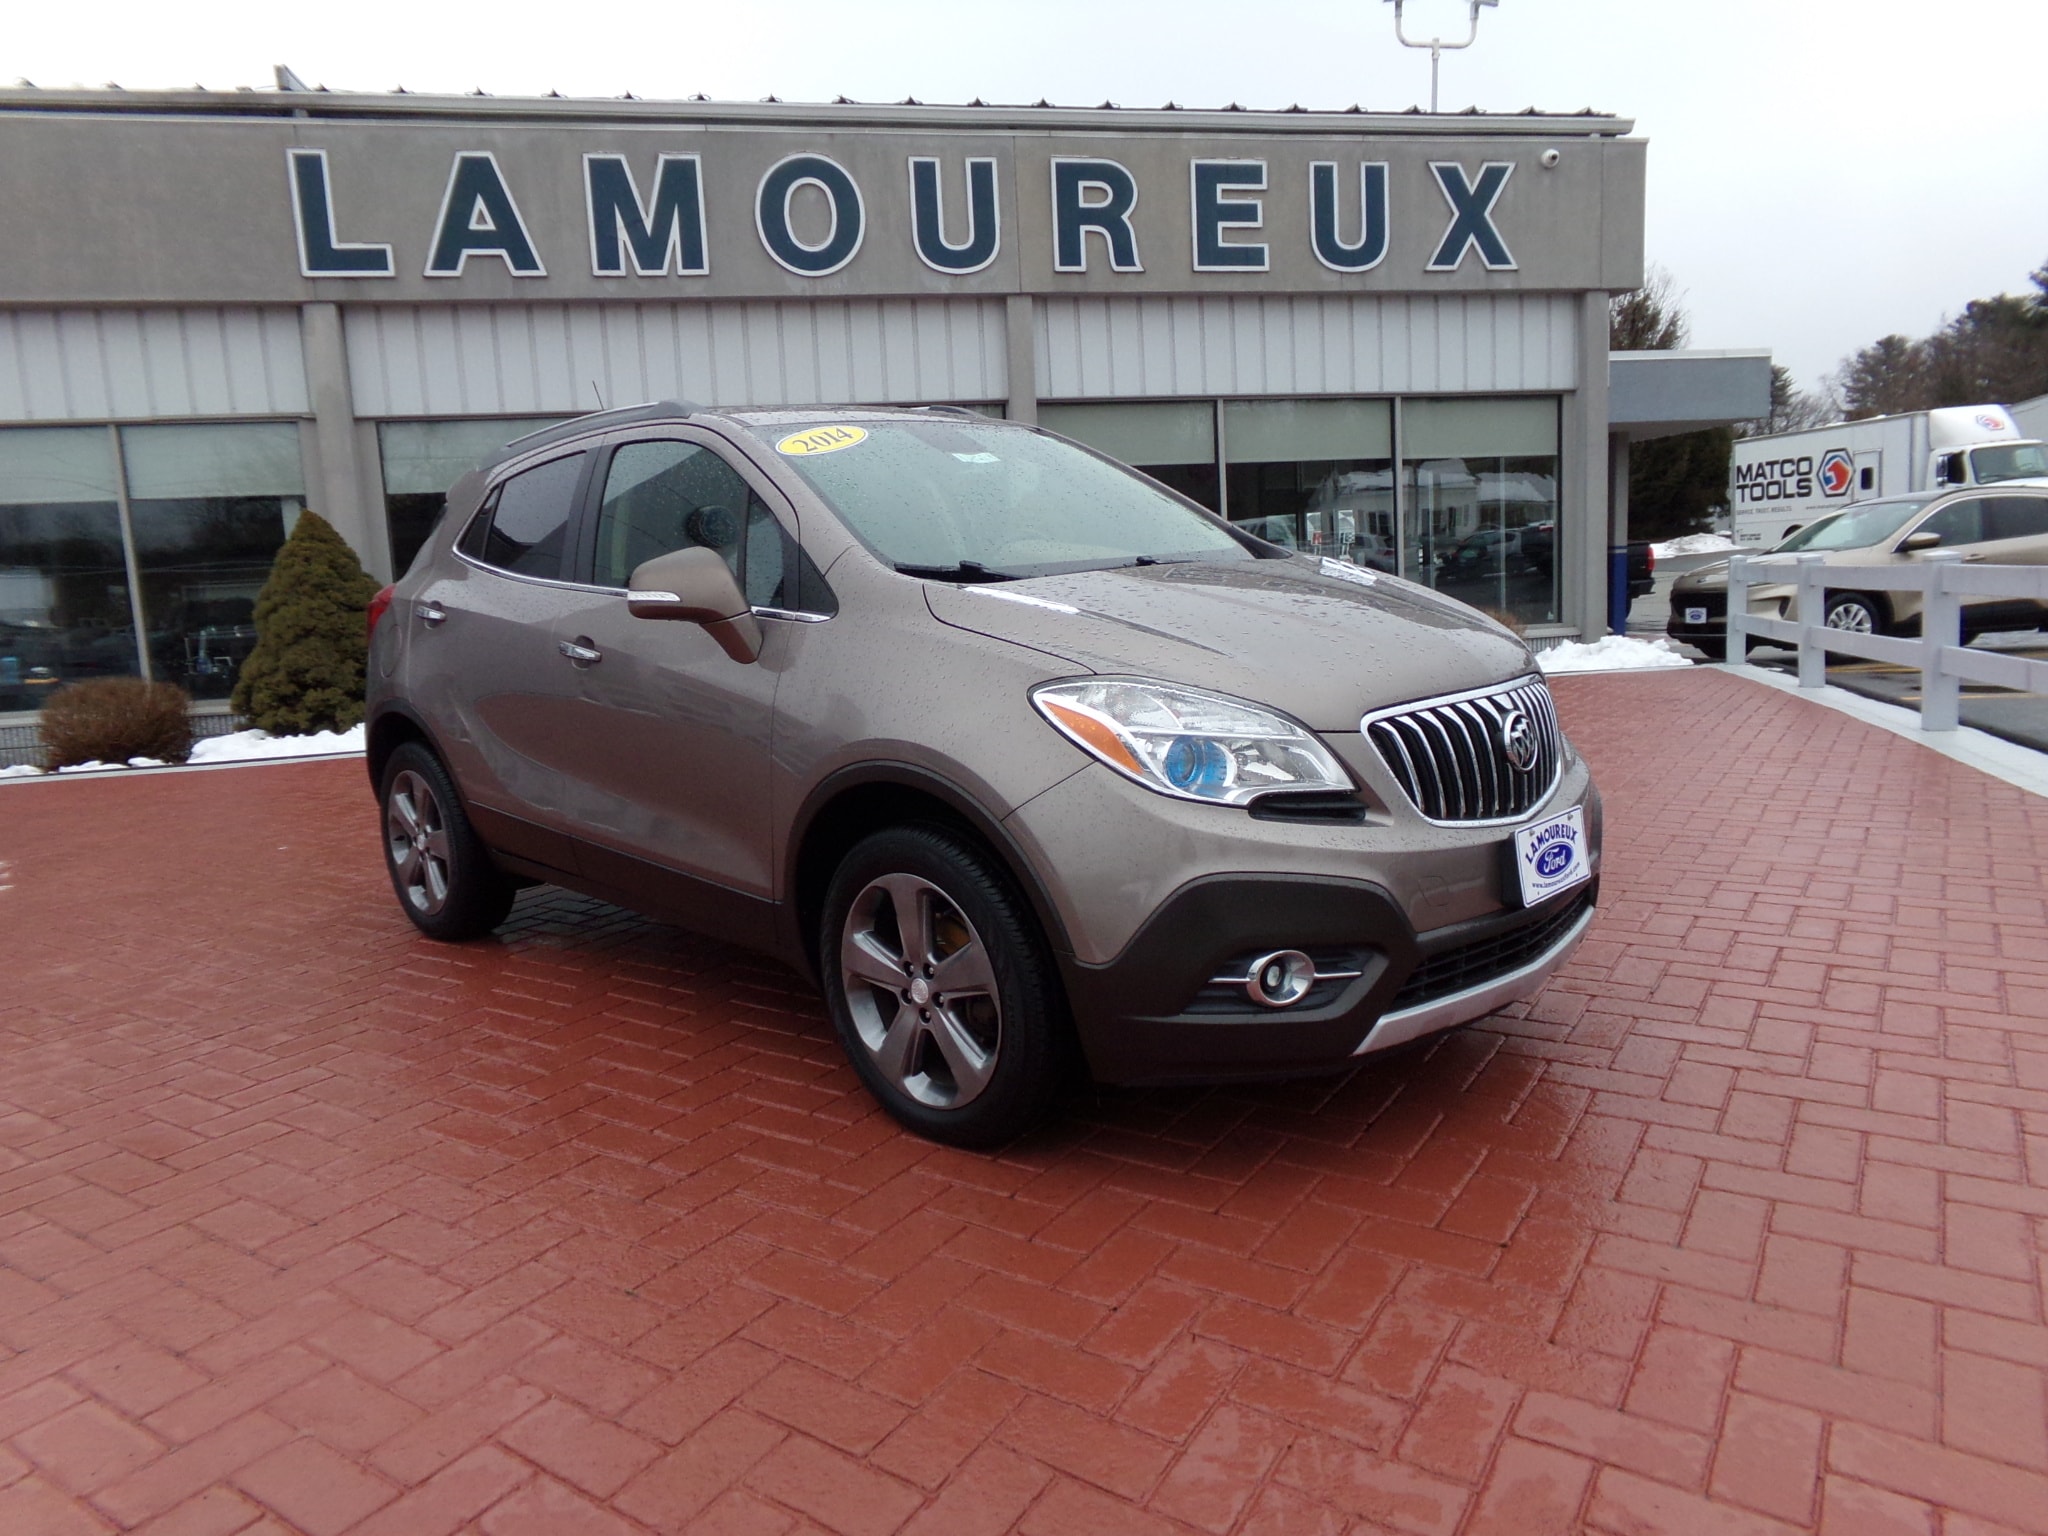 Used 2014 Buick Encore For Sale at Lamoureux Ford | VIN: KL4CJGSB9EB527297